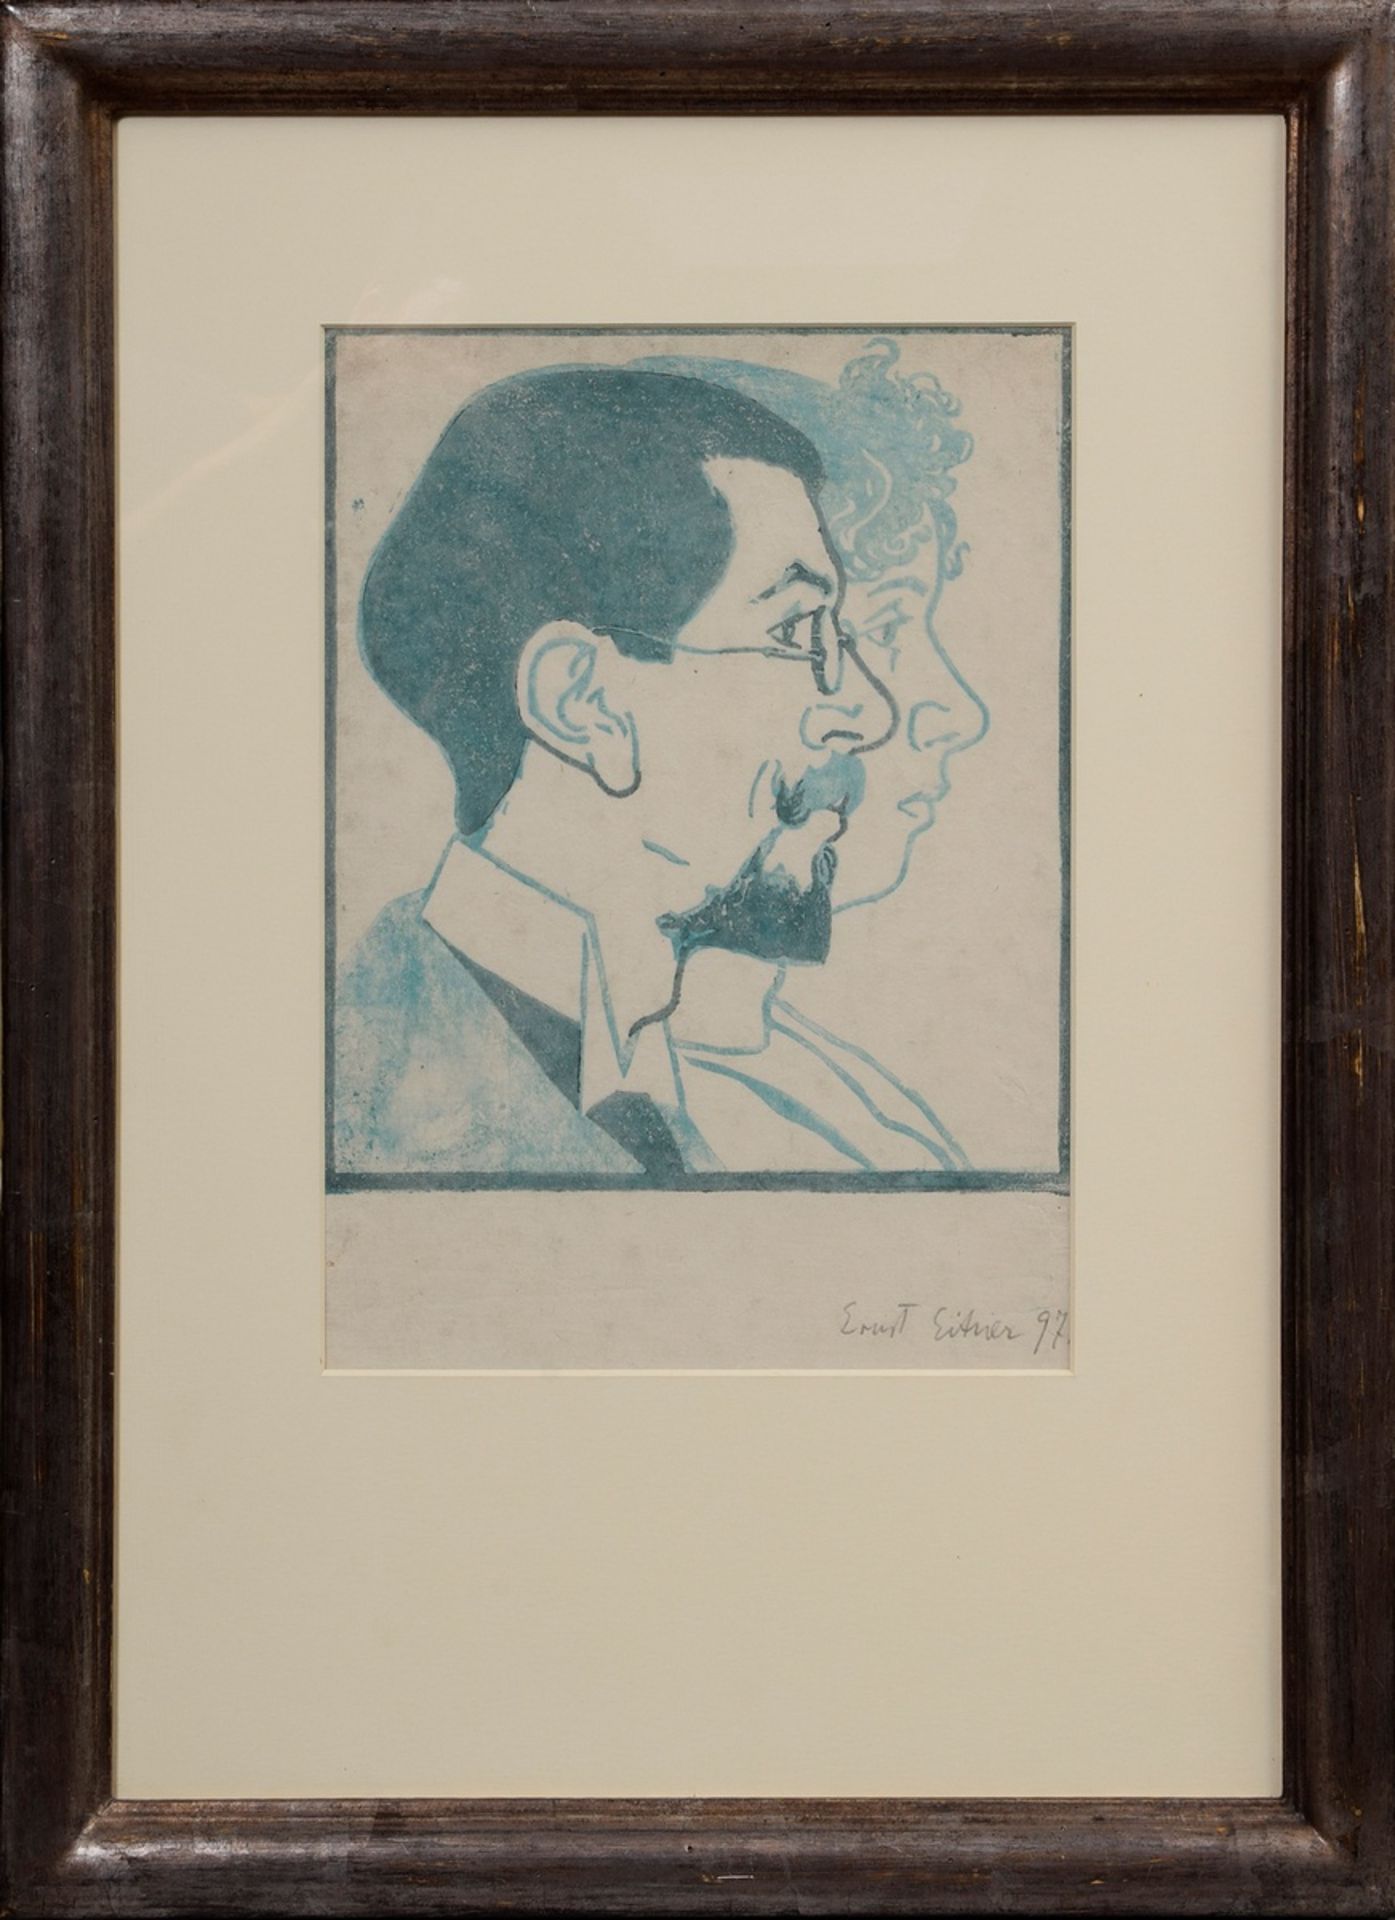 Eitner, Ernst (1867-1955) "Double portrait Ernst and Toni Eitner" 1897, colour woodcut, l.r. sign./ - Image 2 of 3